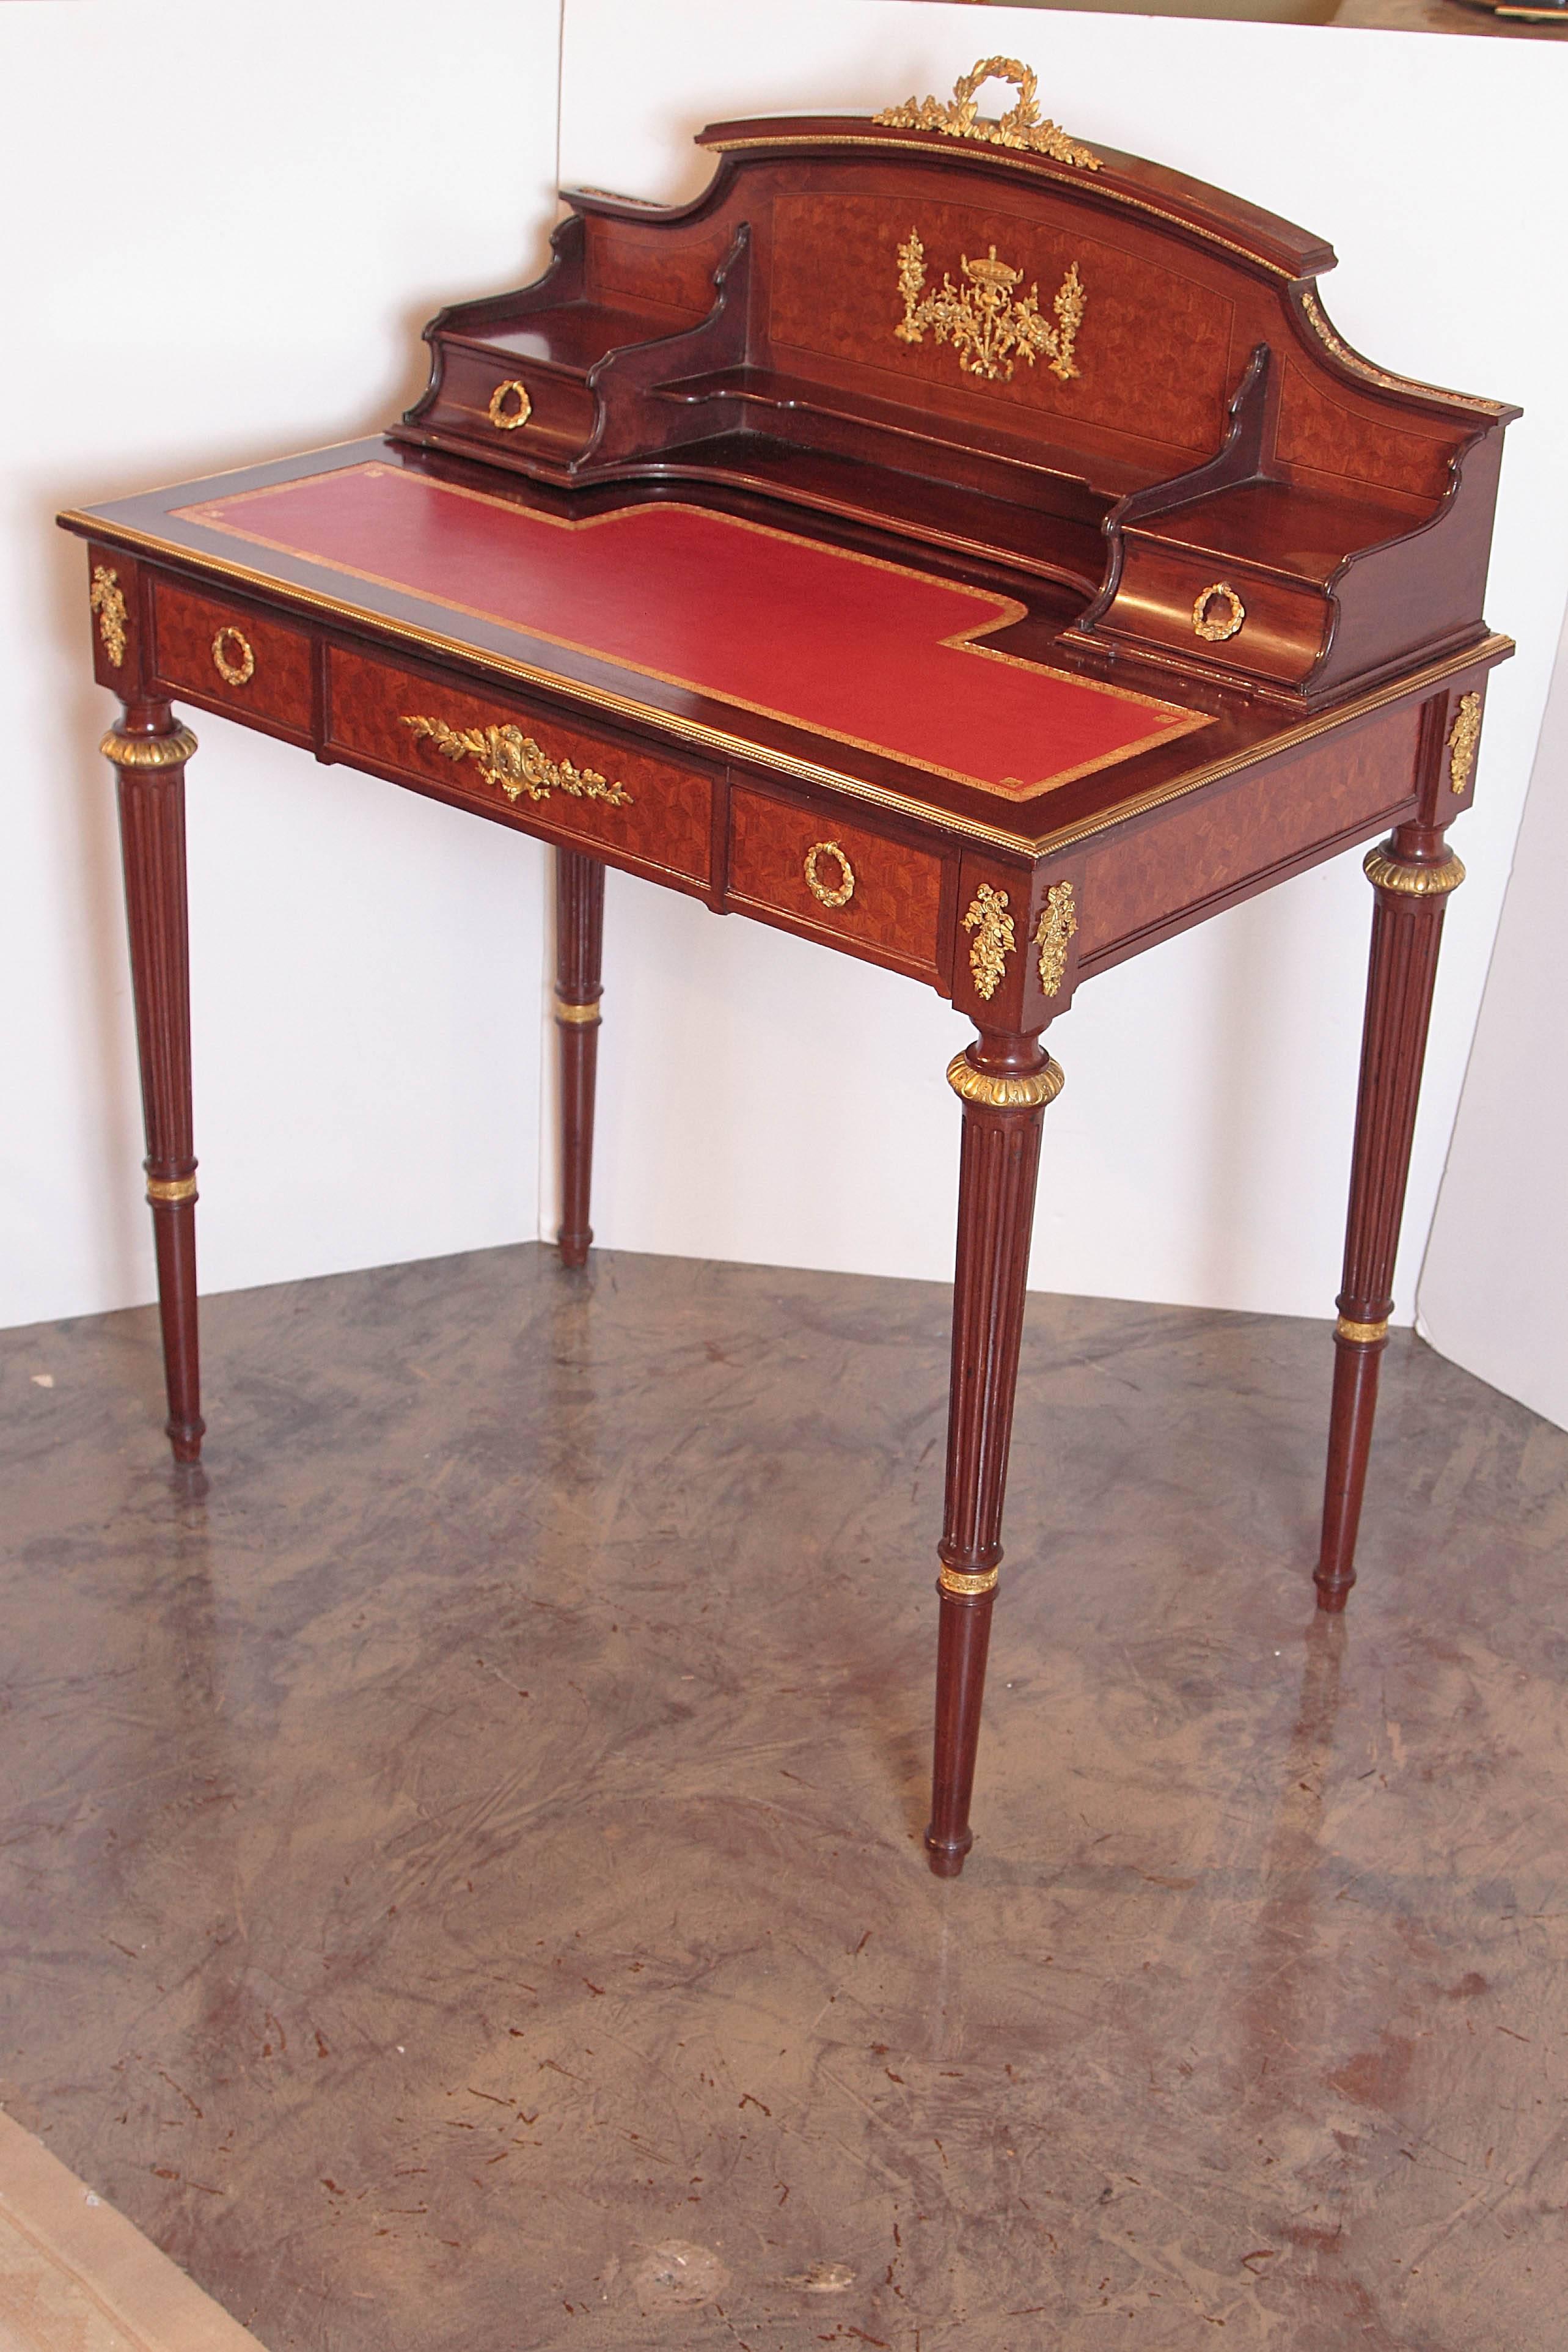 Beautiful 19th century French mahogany and parquetry inlayed French Louis XVI two tiered writing desk. Fine gilt bronze detail. Leather writing surface. Lockplate signed CT LINKE with an index number.